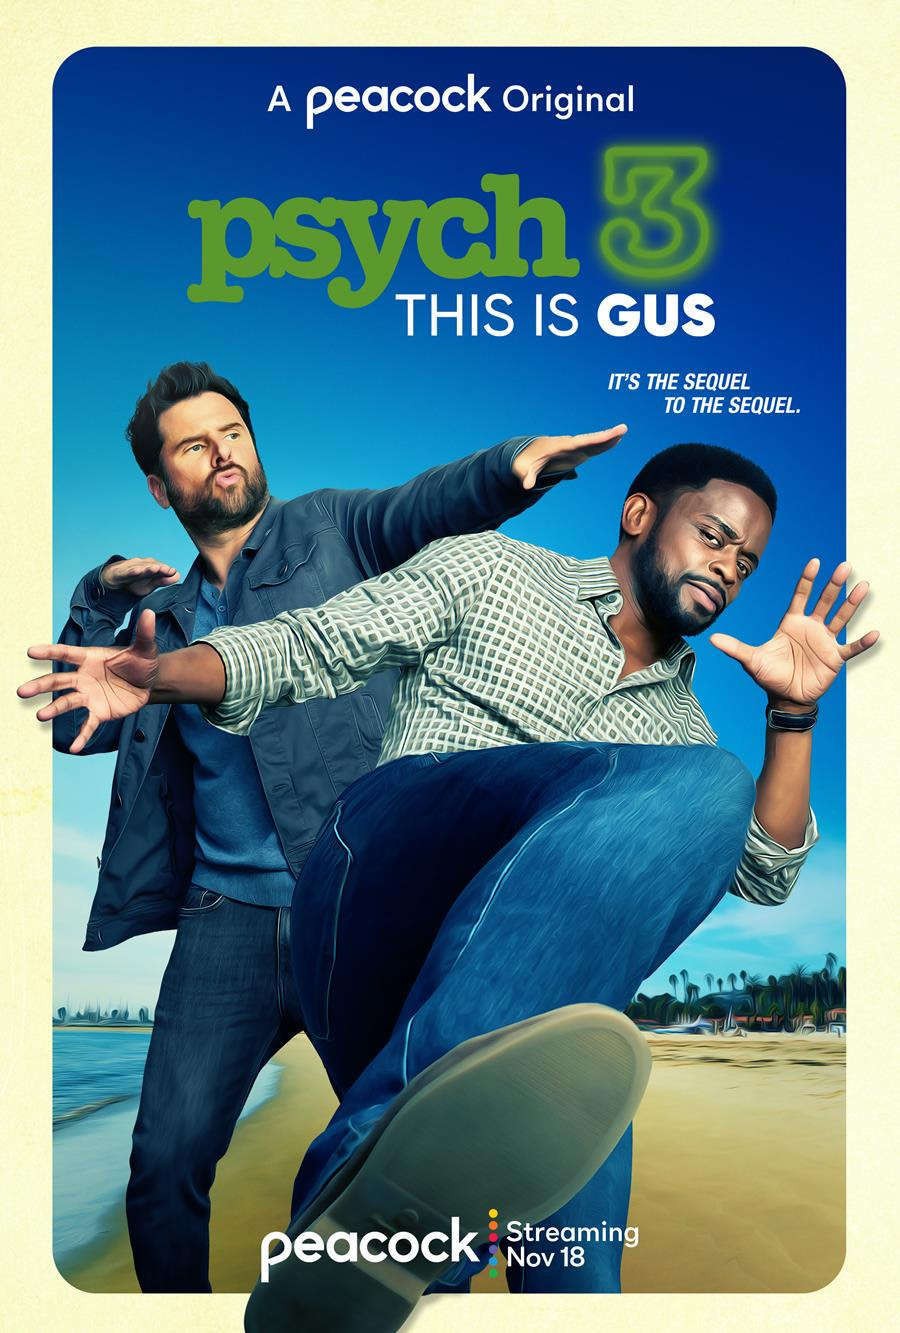 "Psych 3: This Is Gus photo 6"